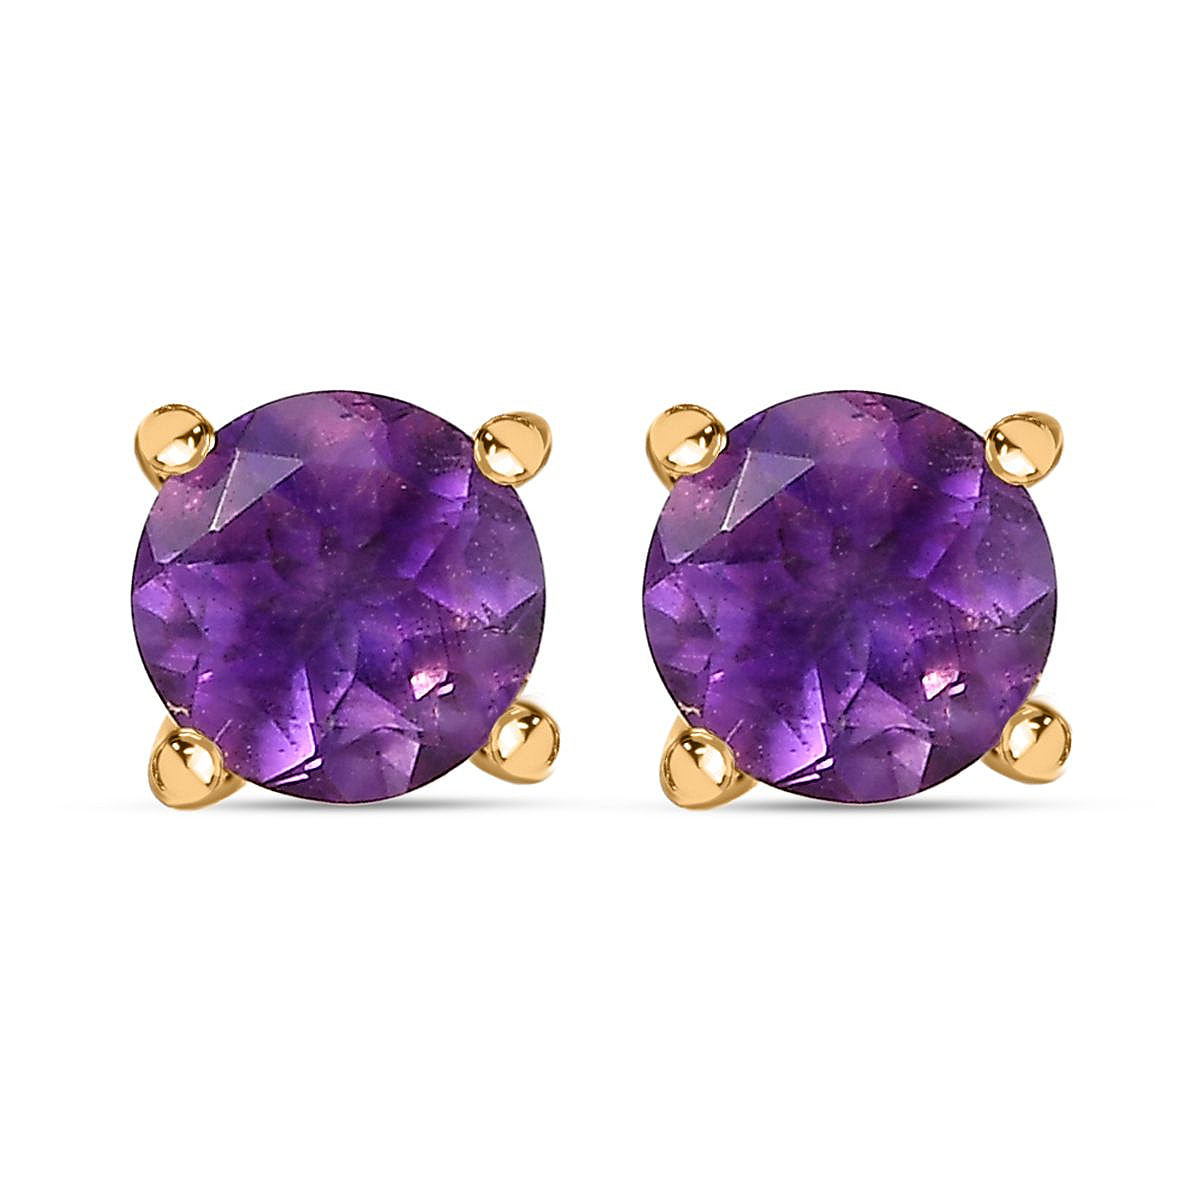 Moroccan Amethyst  Solitaire Stud Earrings in 18K Yellow Gold Vermeil Plated Sterling Silver 1.43 Ct.